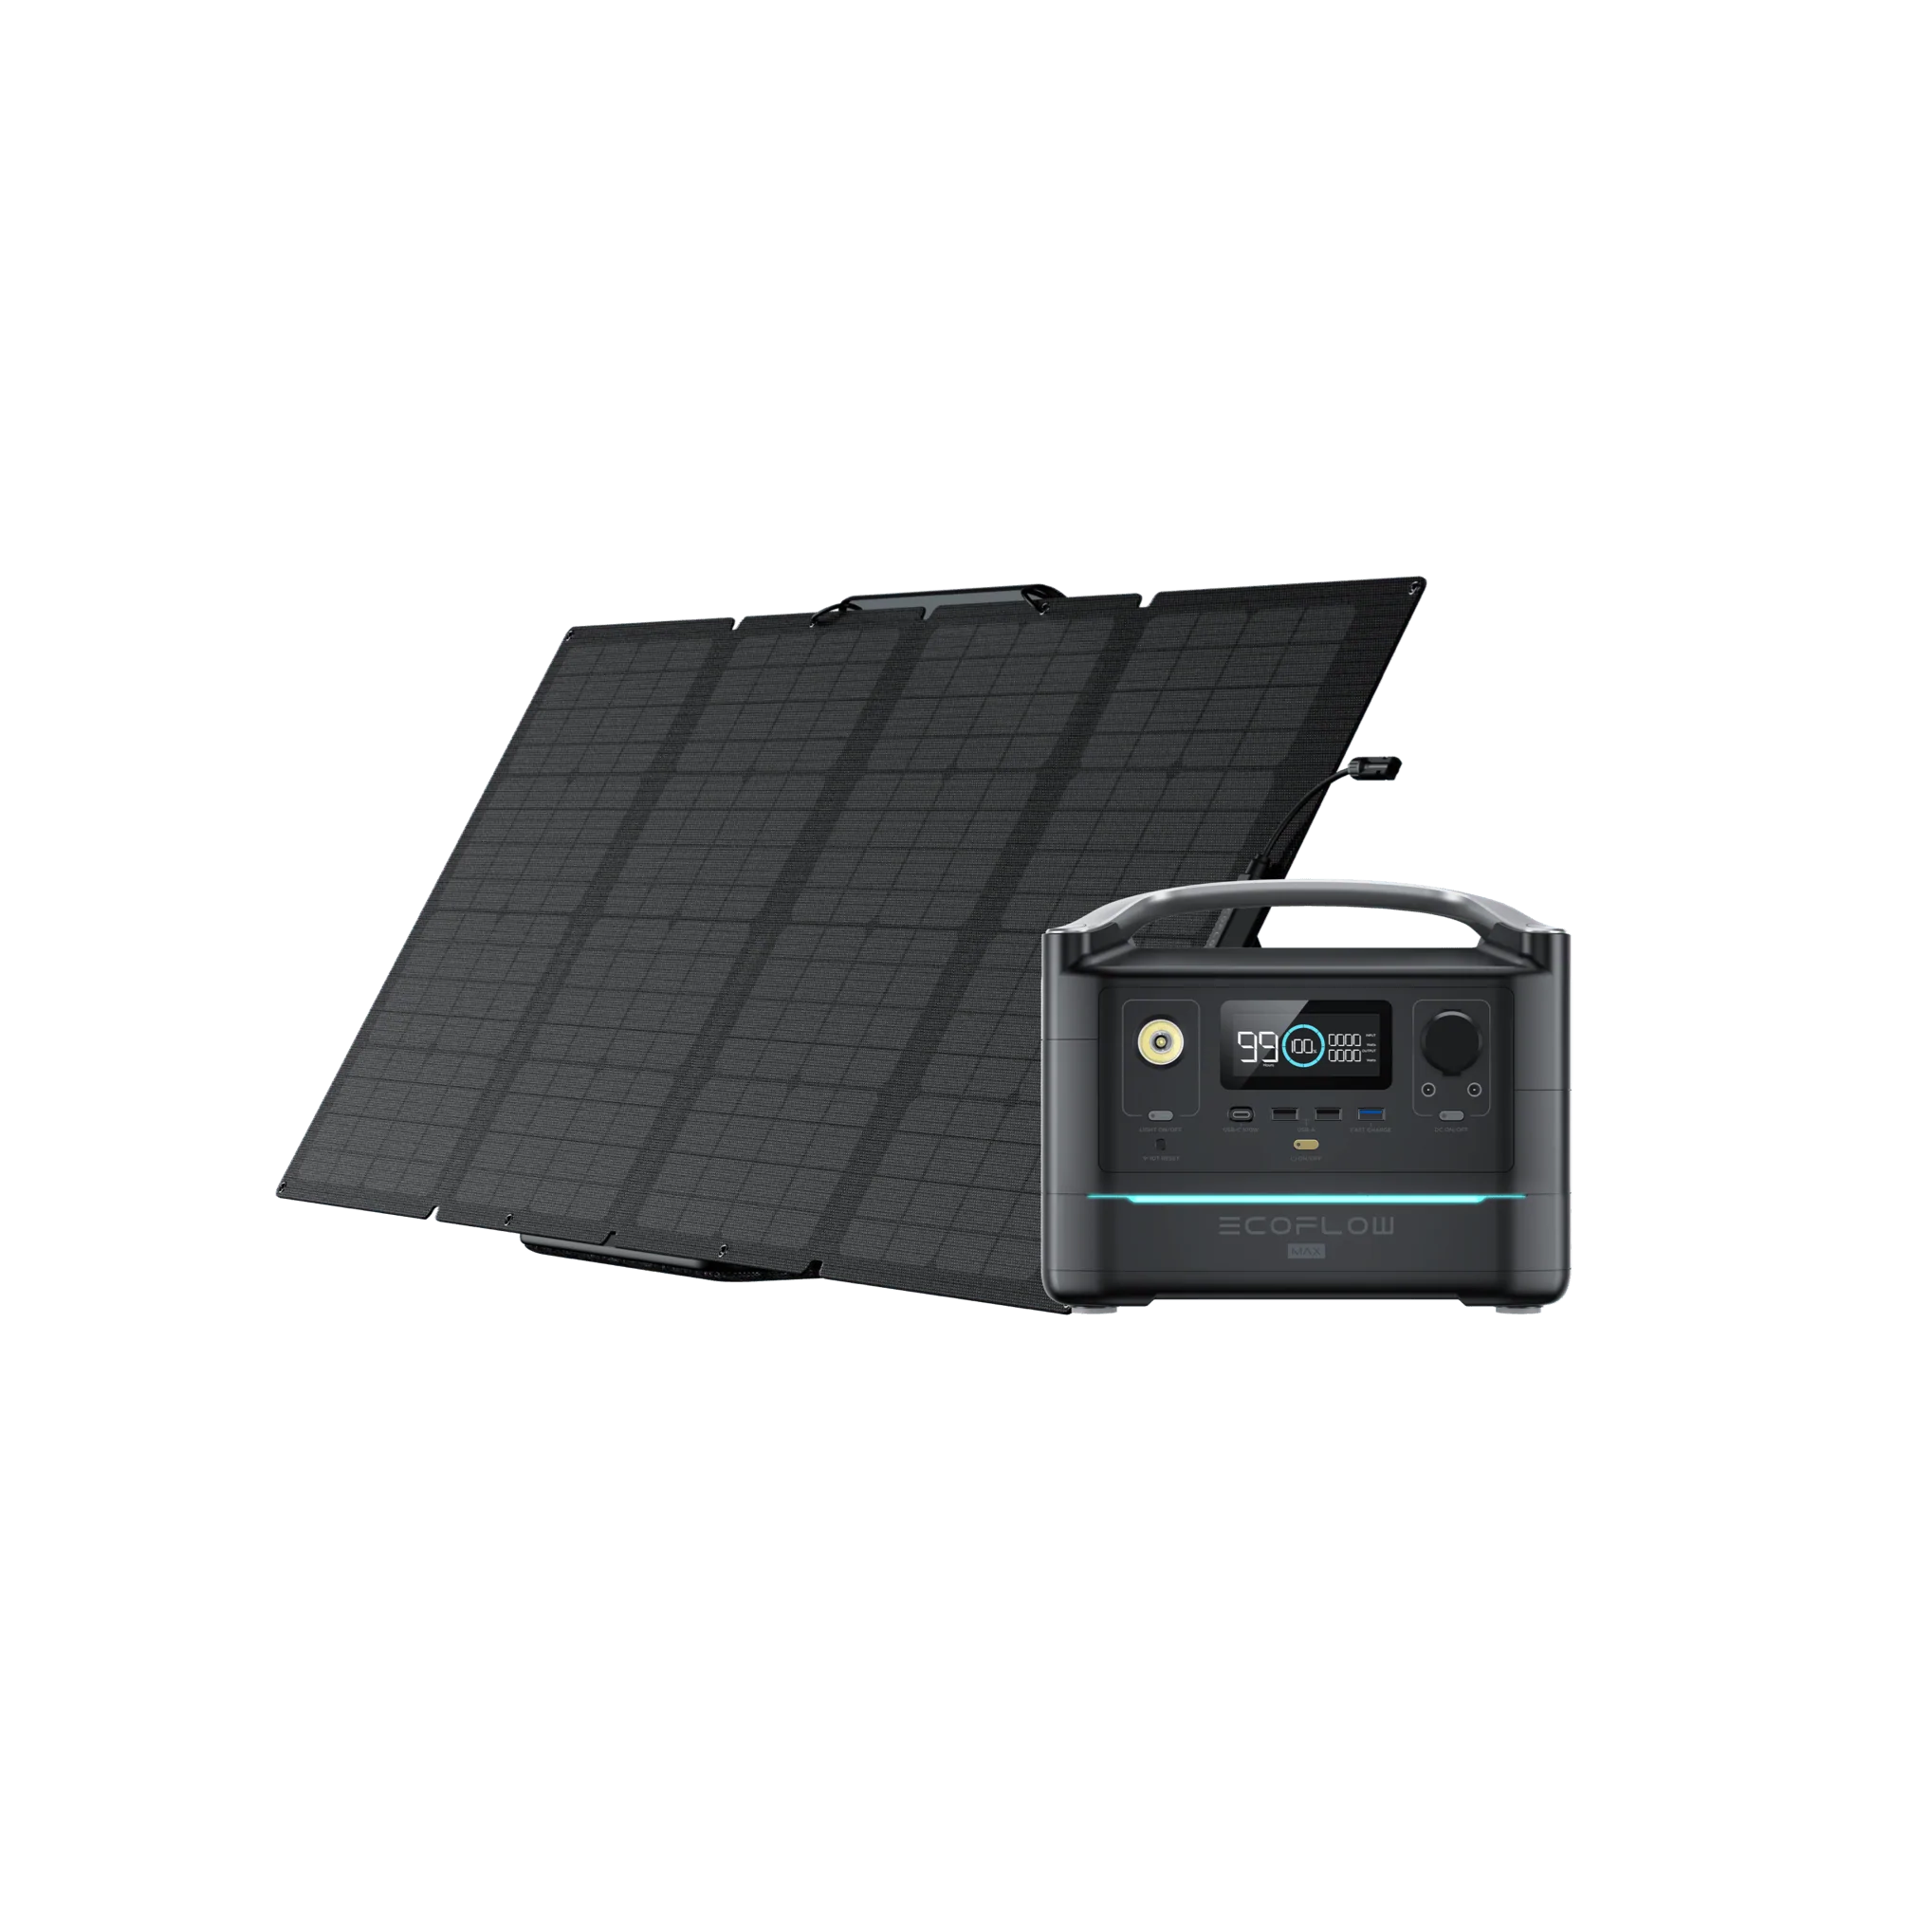 A portable solar panel with a battery and charger.